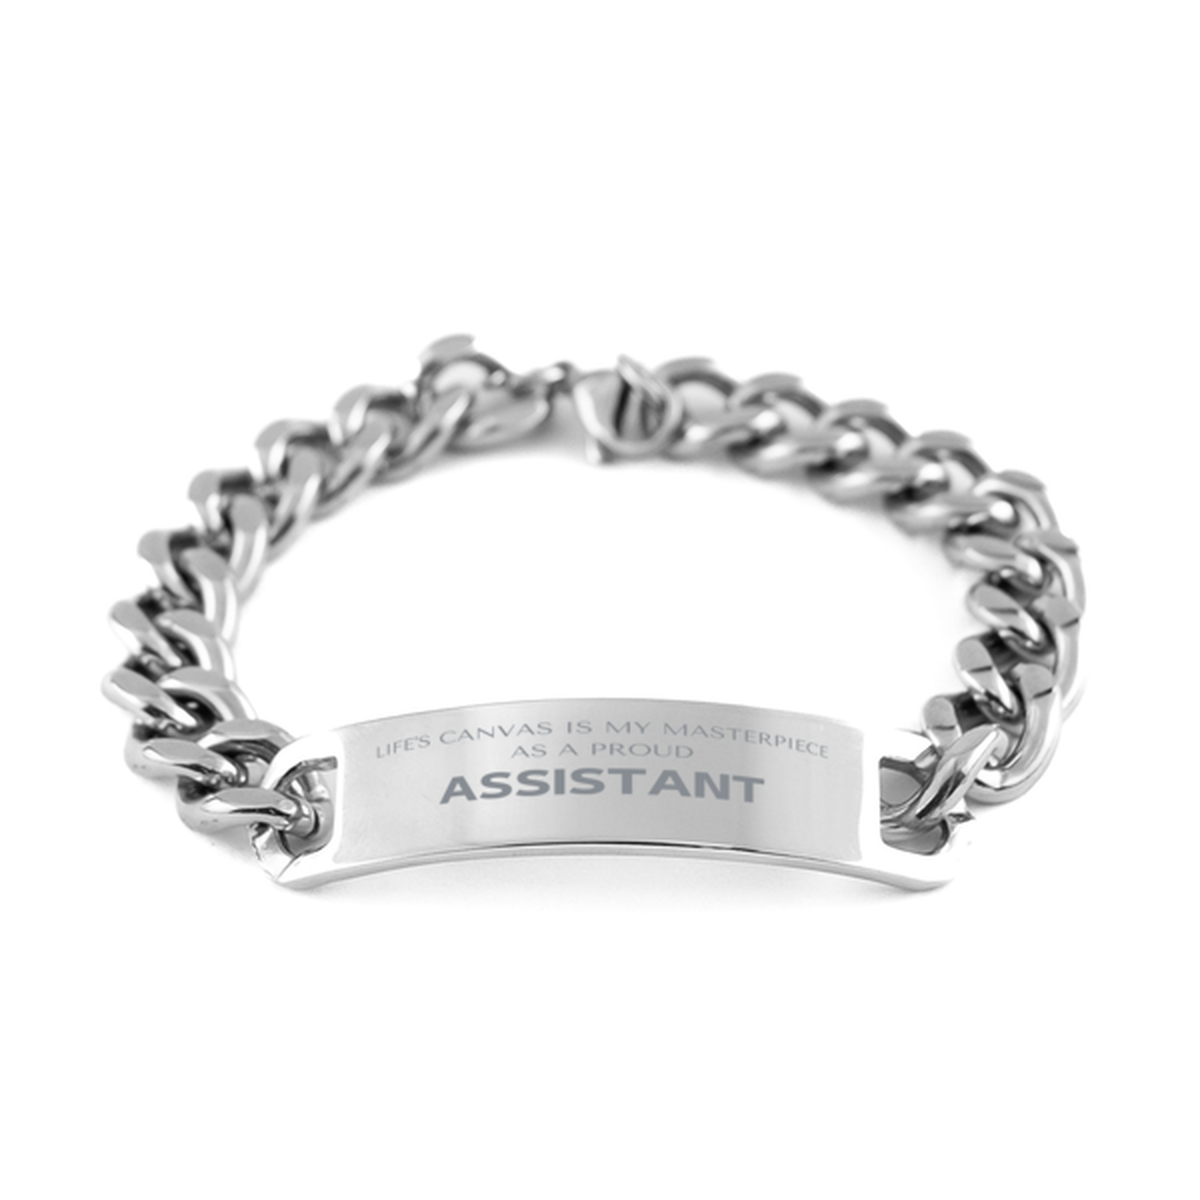 Proud Assistant Gifts, Life's canvas is my masterpiece, Epic Birthday Christmas Unique Cuban Chain Stainless Steel Bracelet For Assistant, Coworkers, Men, Women, Friends